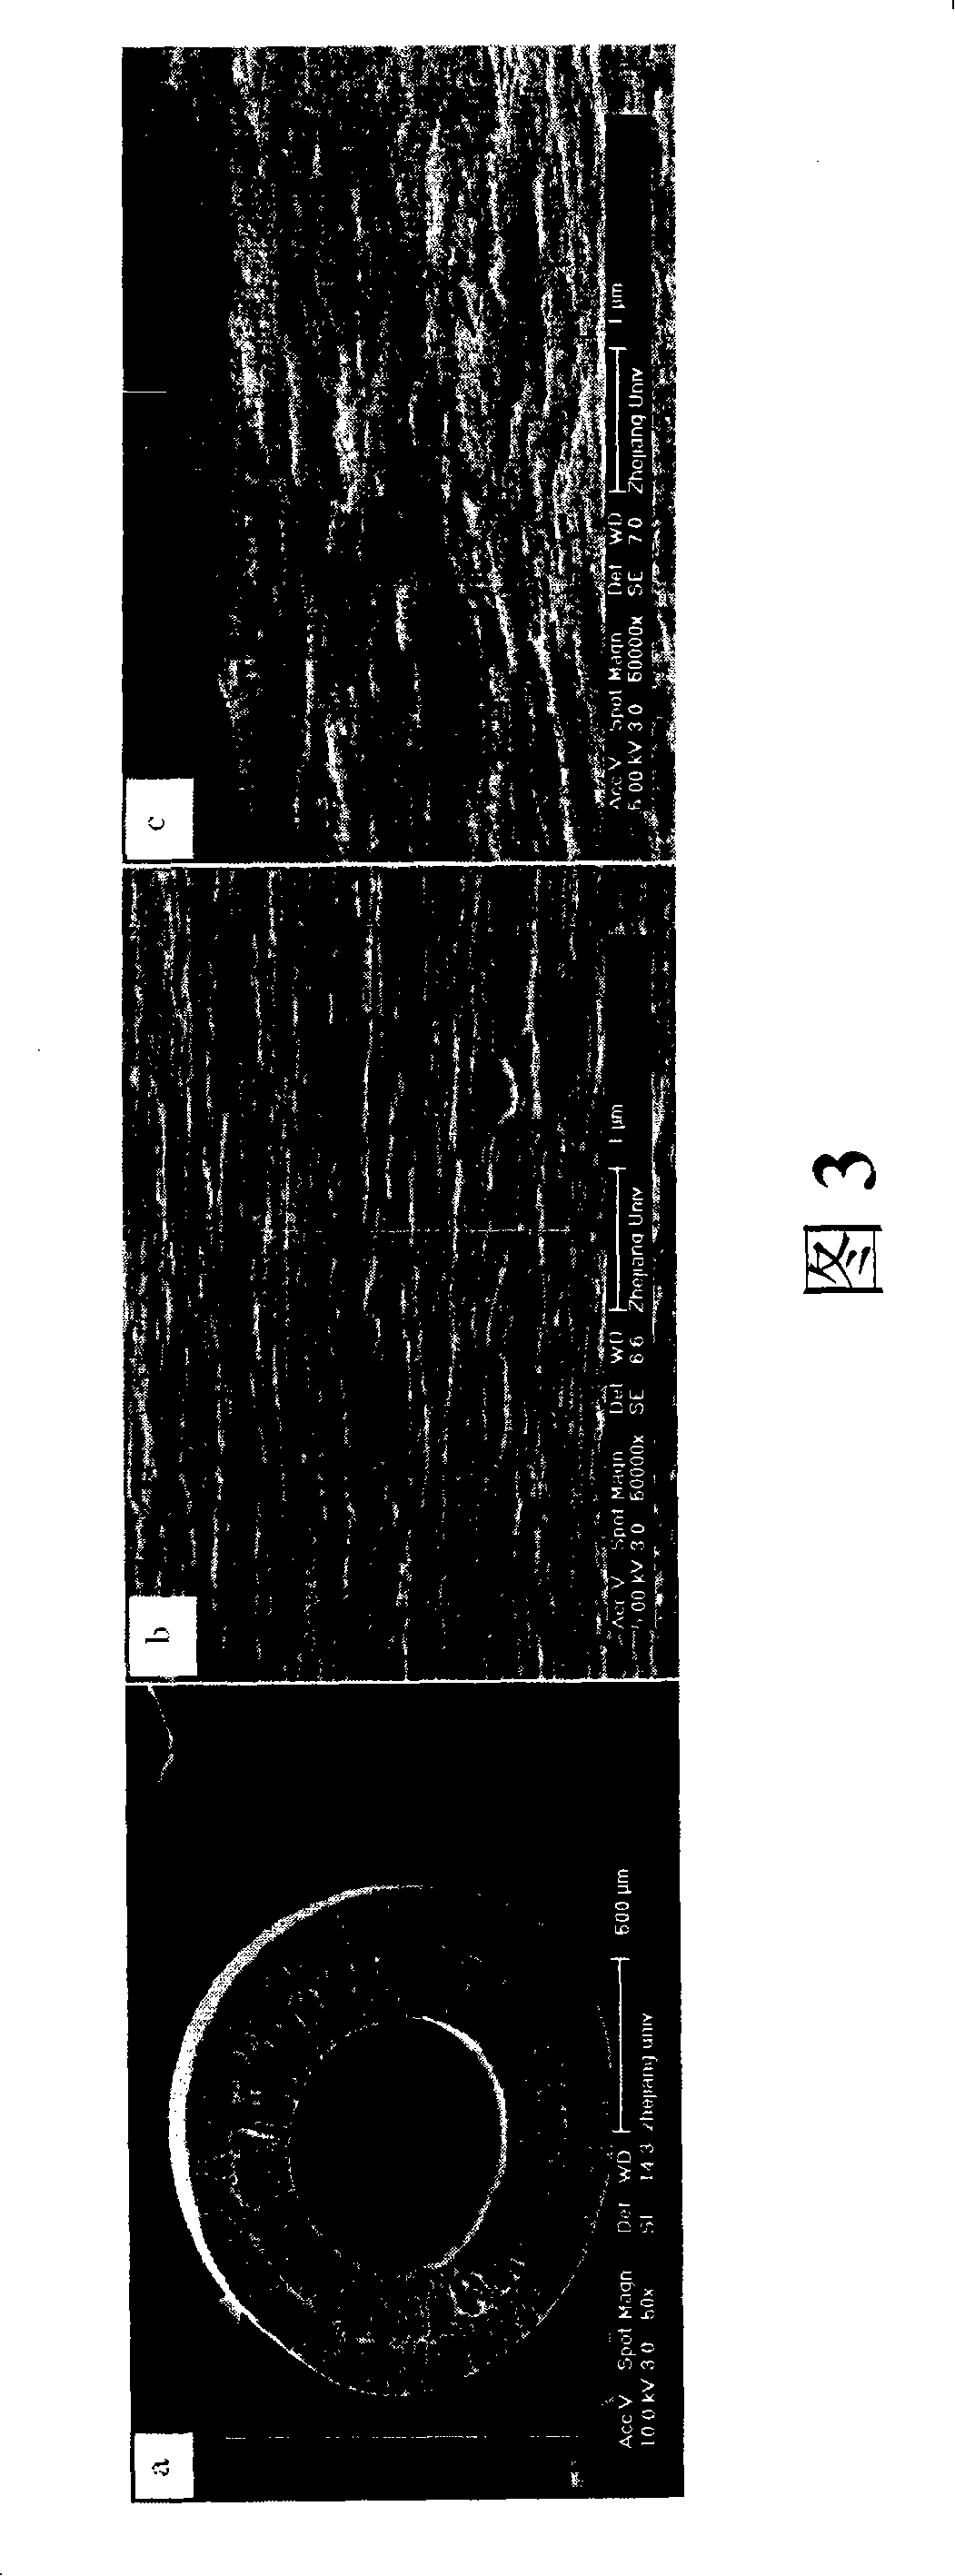 Hydrophilicity kynoar hollow fiber microporous membrane and preparation method thereof